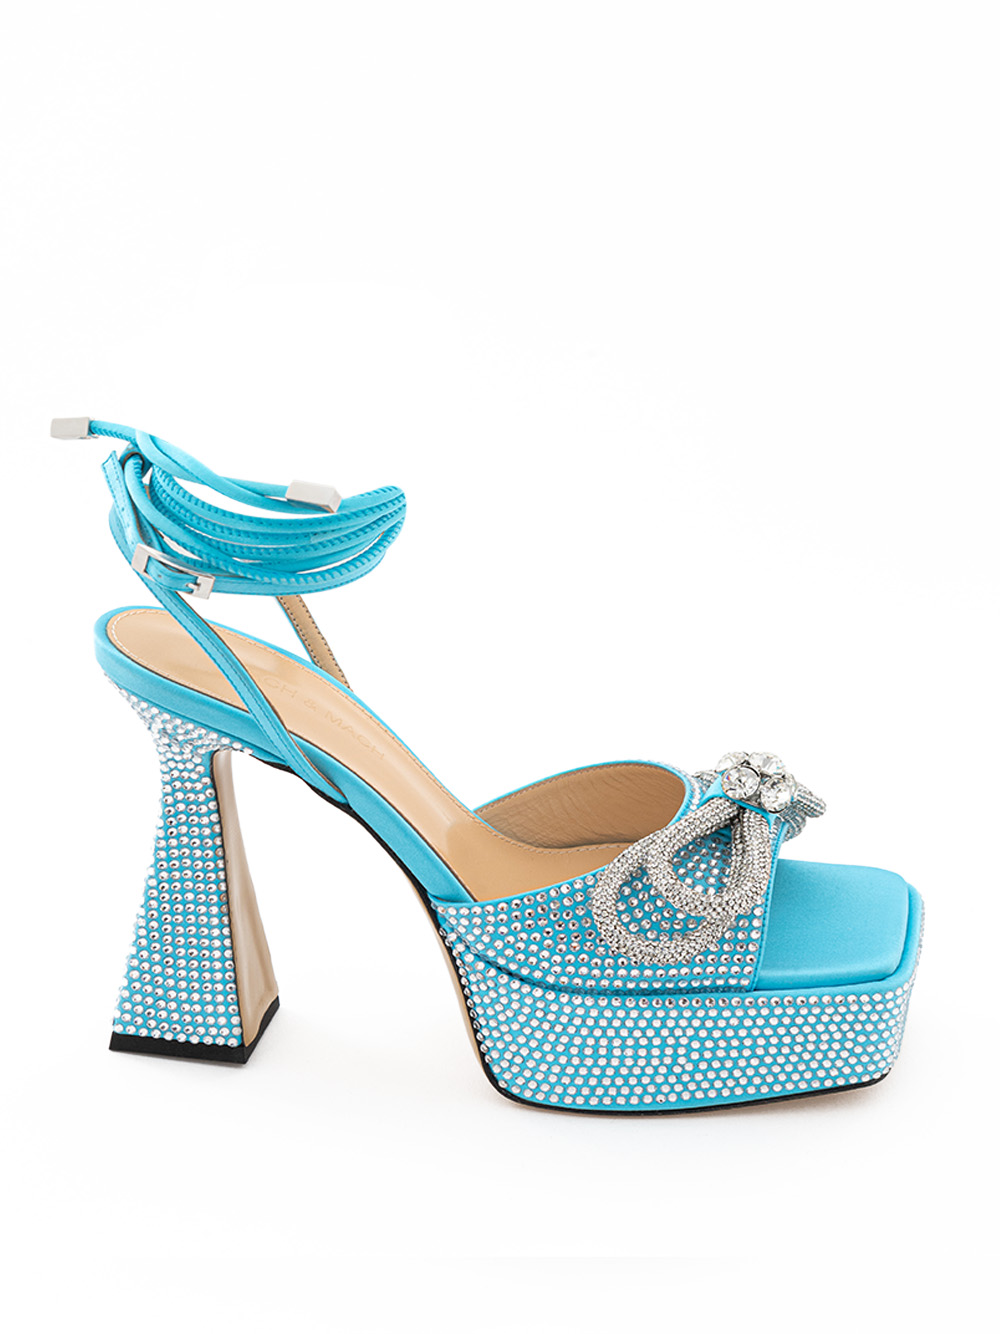 Blue Leather Sandals with Double Bow Crystals